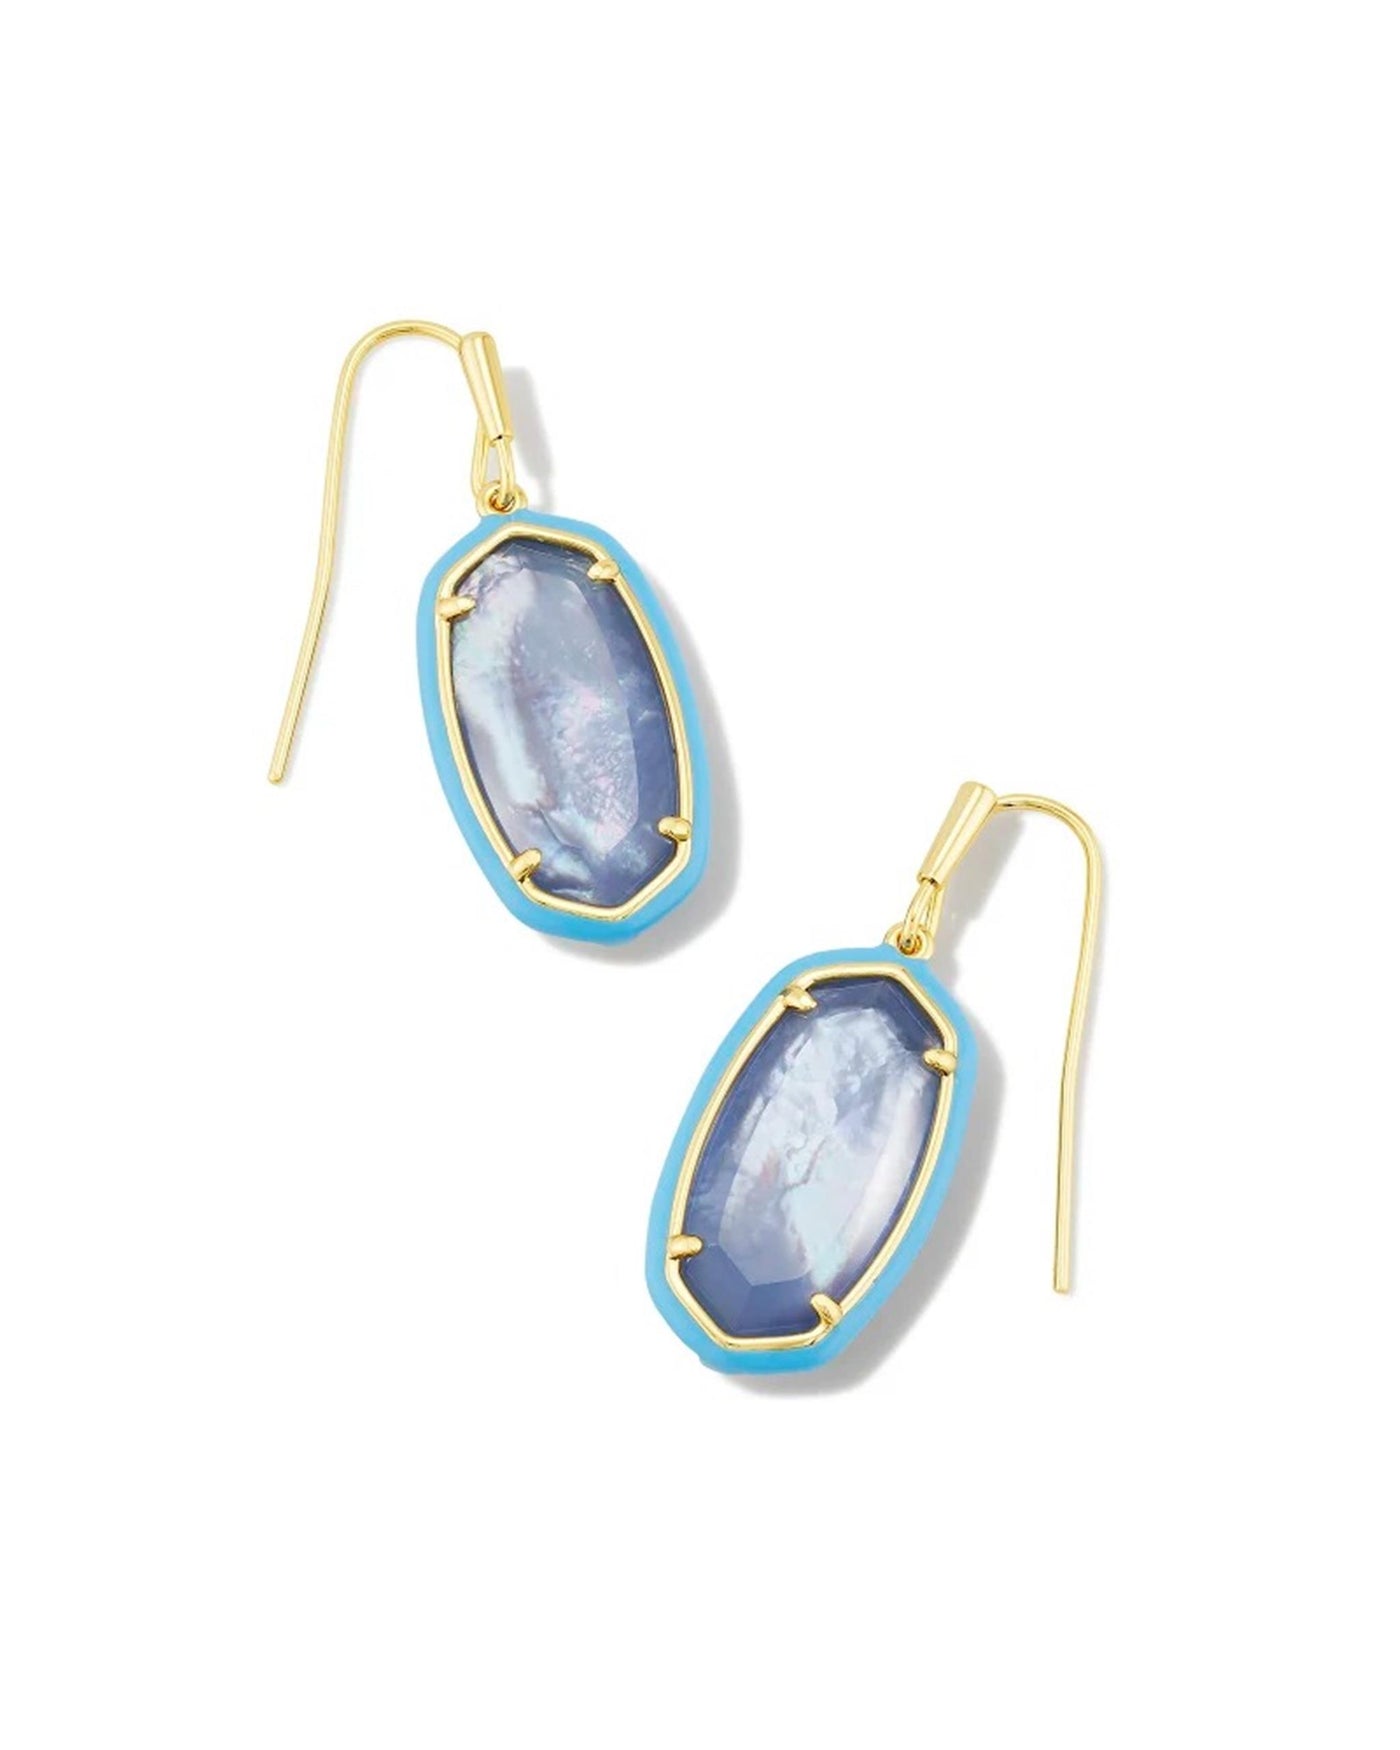 Gold Tone Earrings Featuring Periwinkle Illusion by Kendra Scott